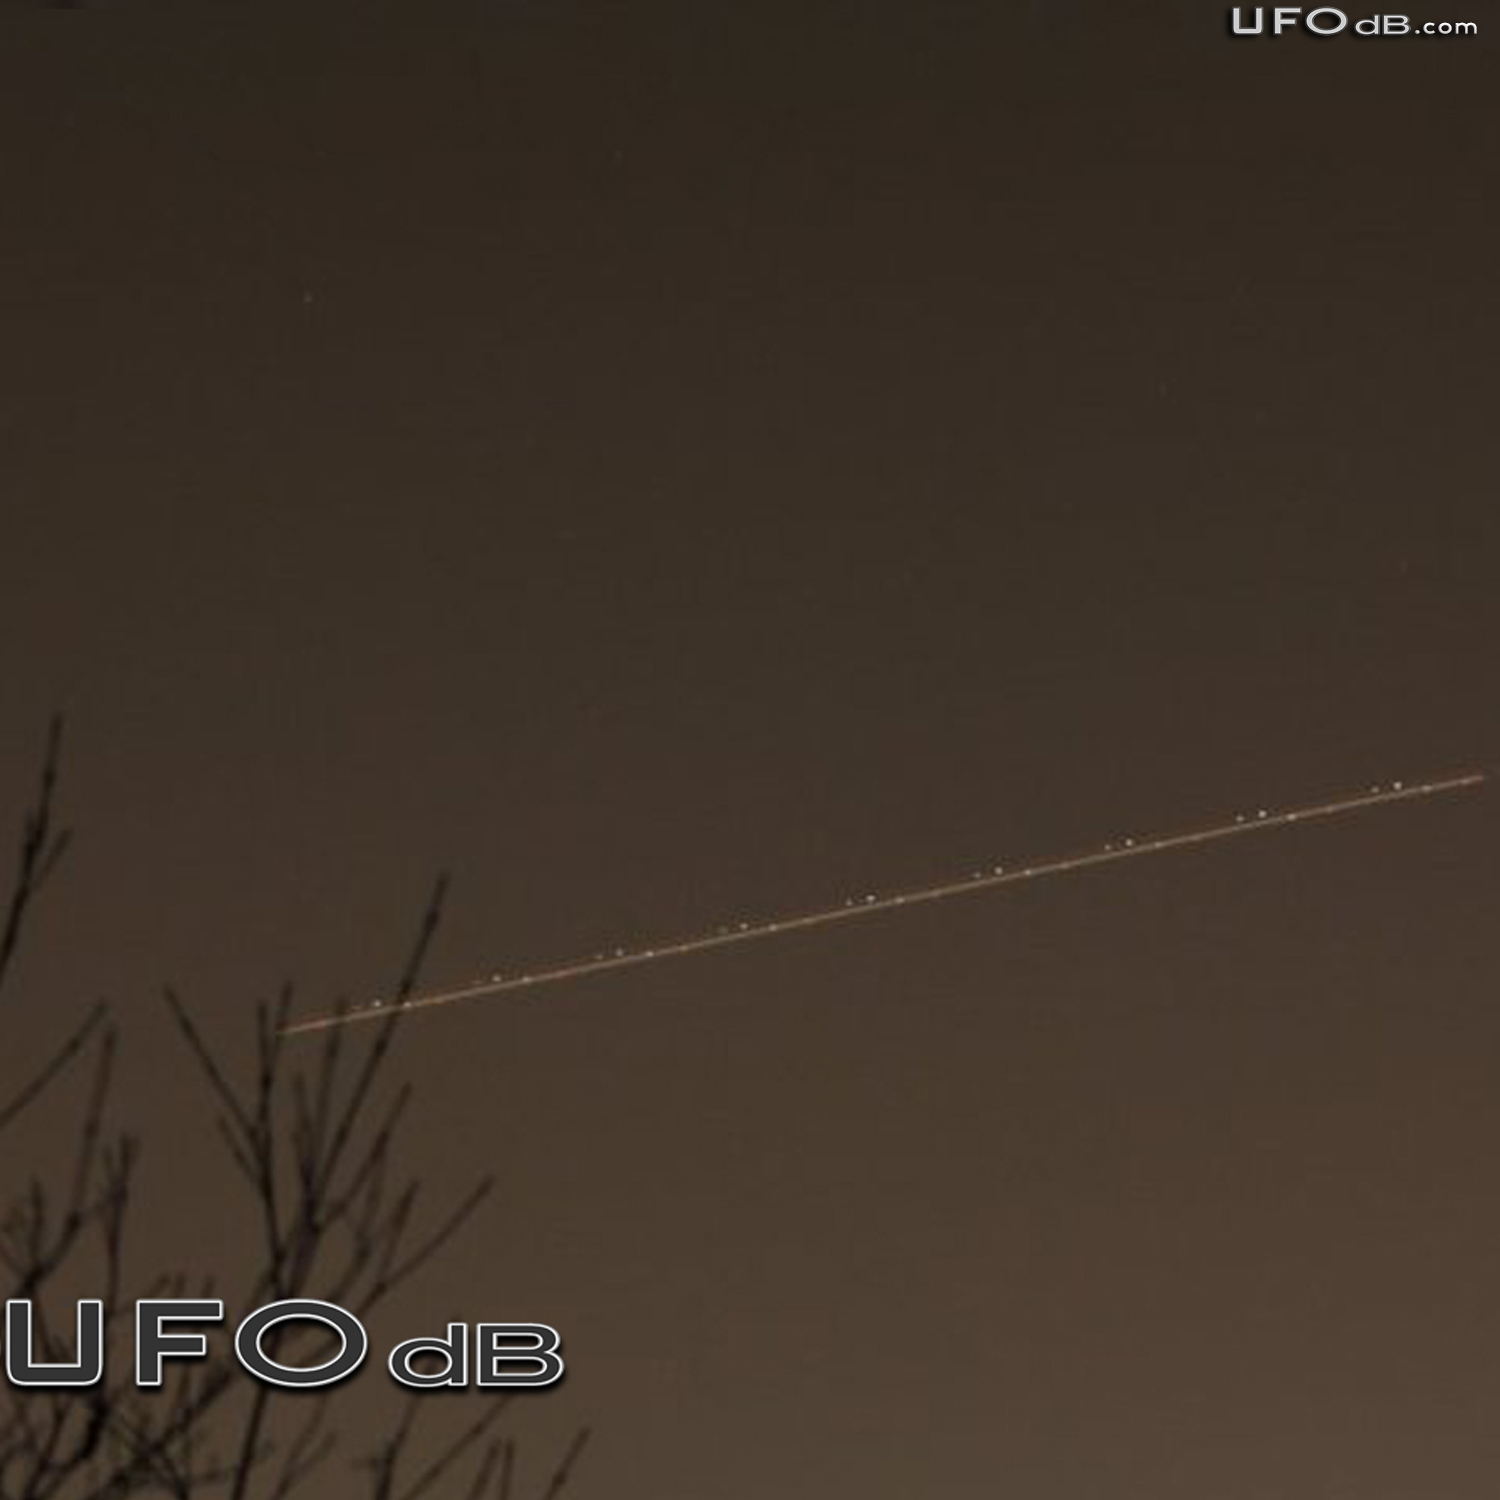 Huge UFO Spaceship with glowing lights seen in Germany | February 2011 UFO Picture #254-2